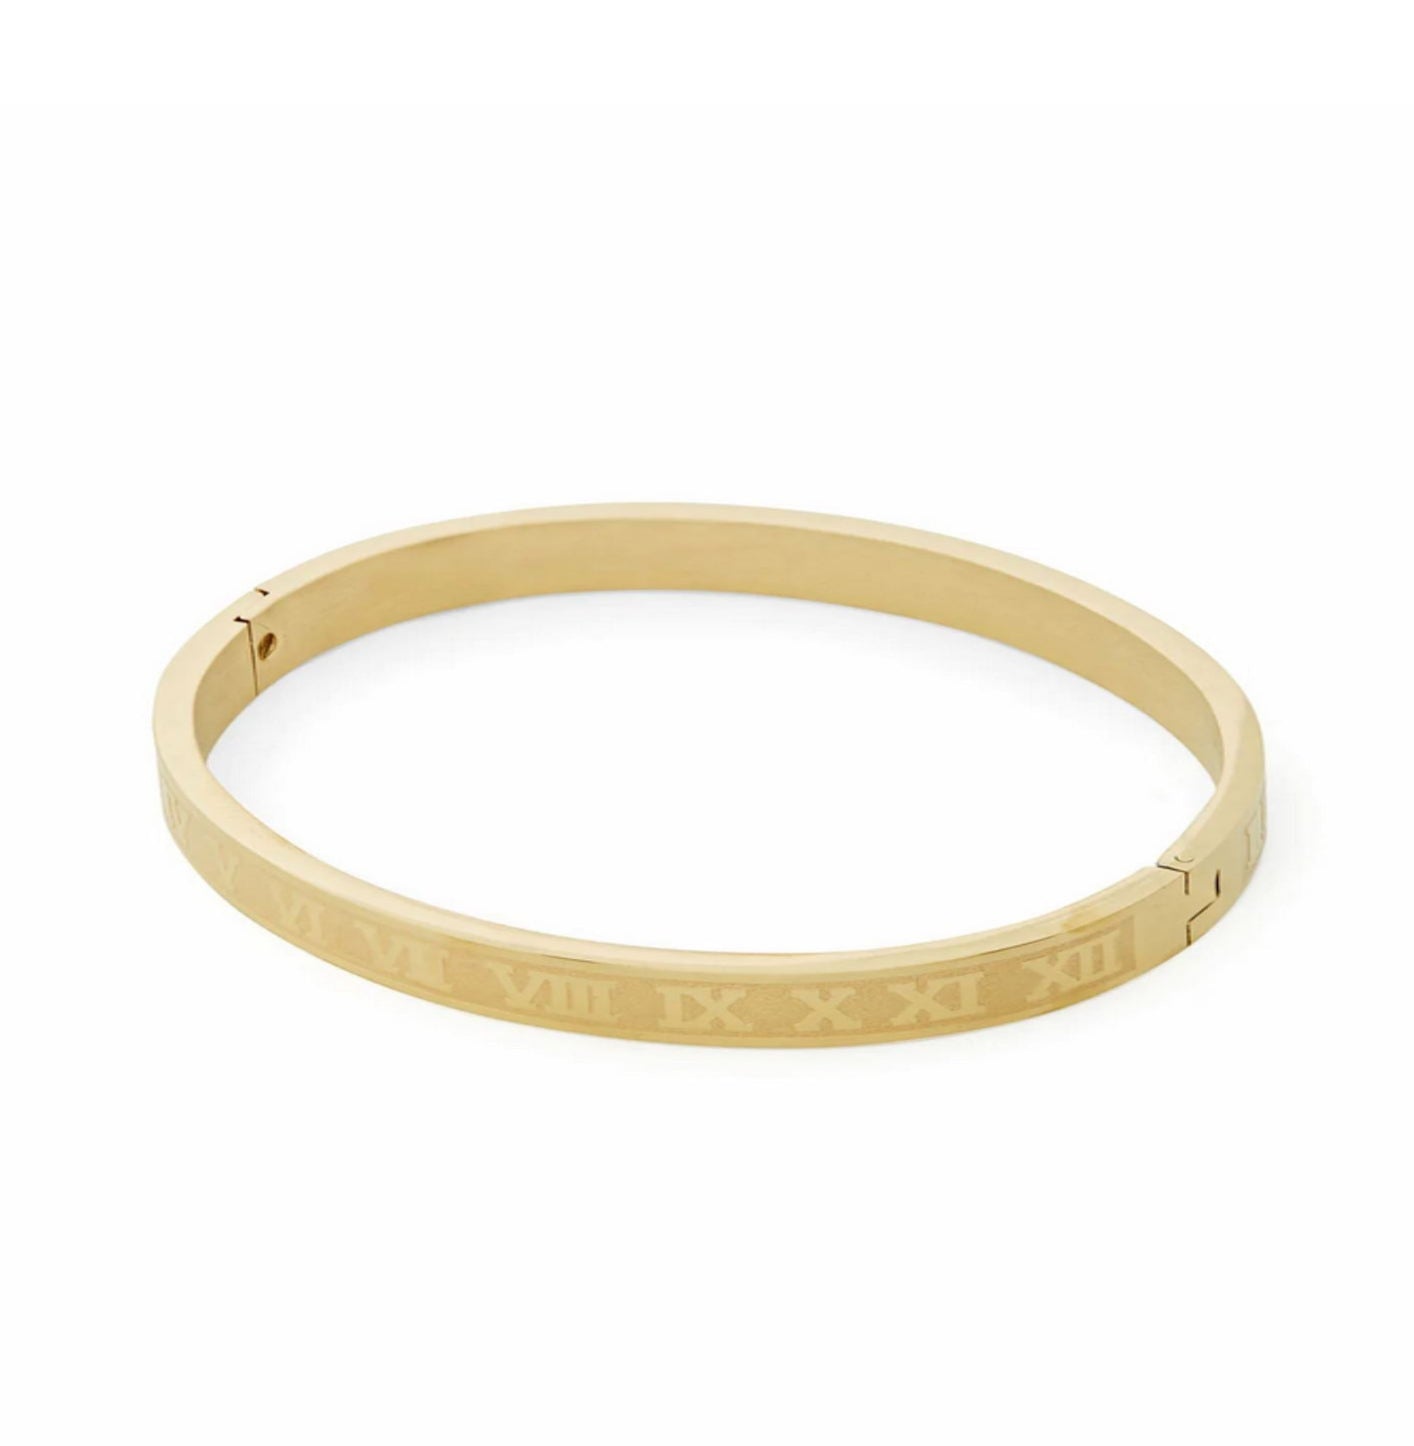 ROMAN NUMERAL BRACELET - GOLD ring Yubama Jewelry Online Store - The Elegant Designs of Gold and Silver ! Gold 